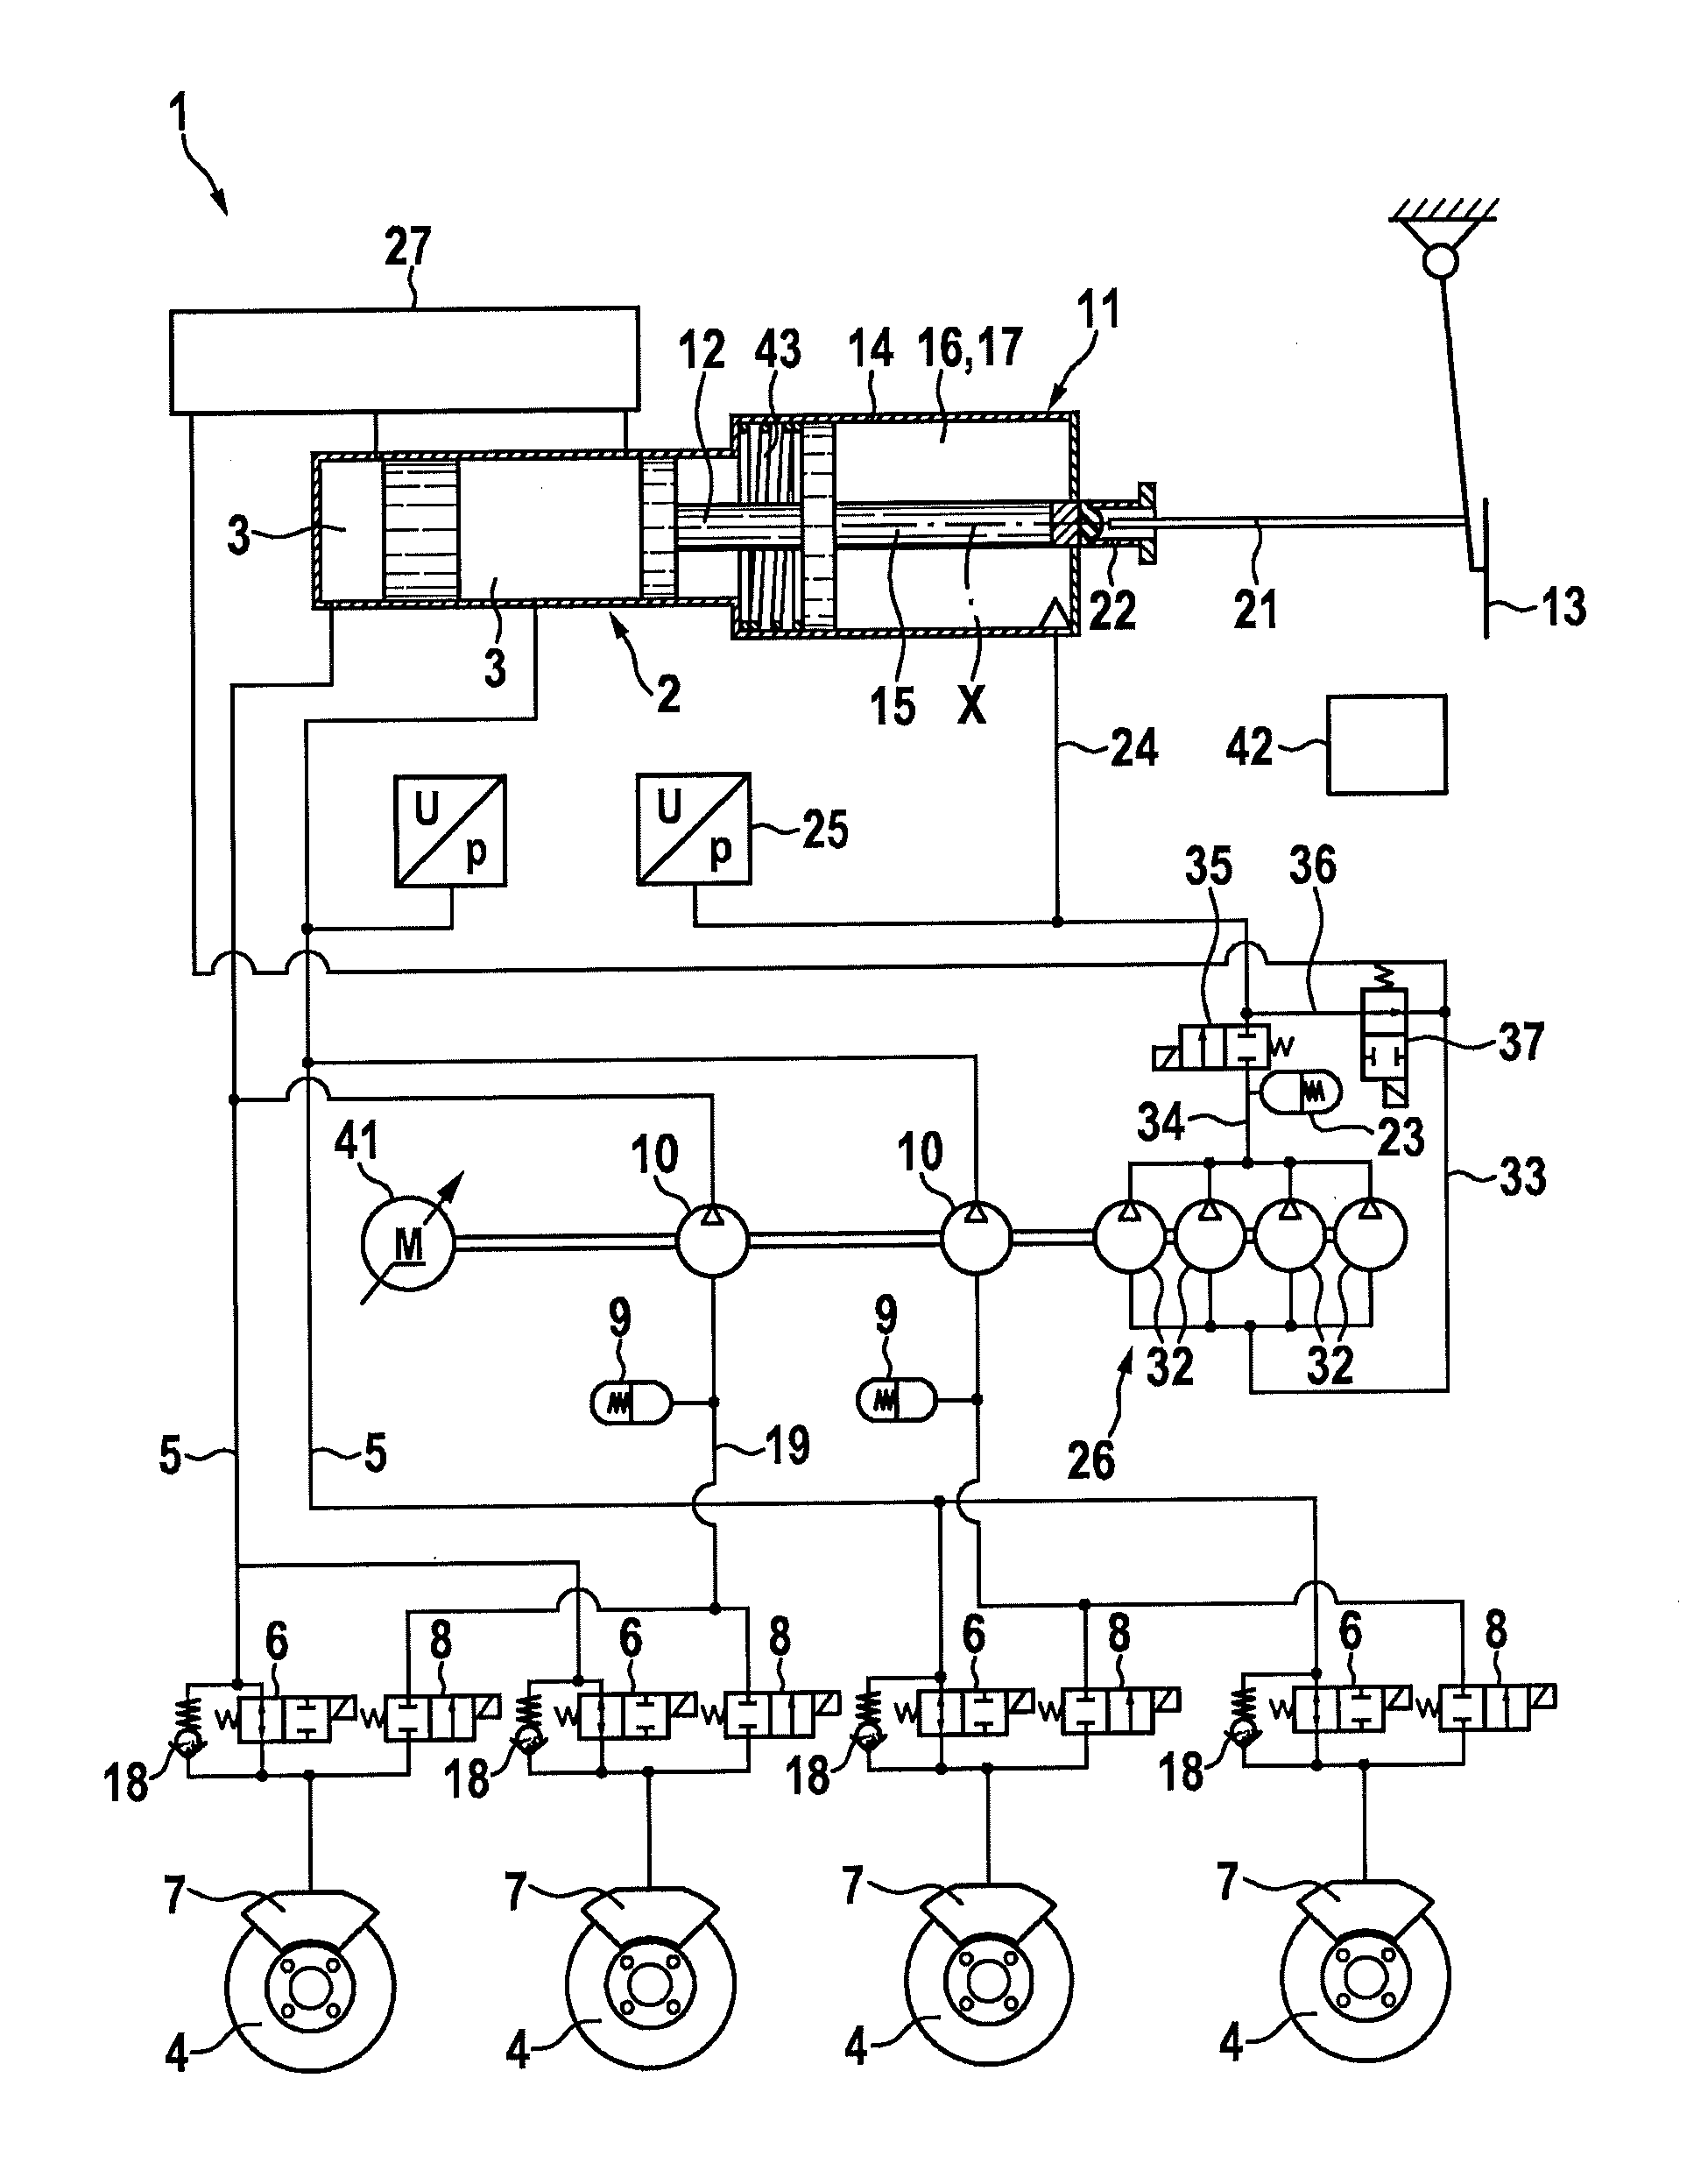 Power-assisted braking system for a vehicle and method for controlling the power-assisted braking system